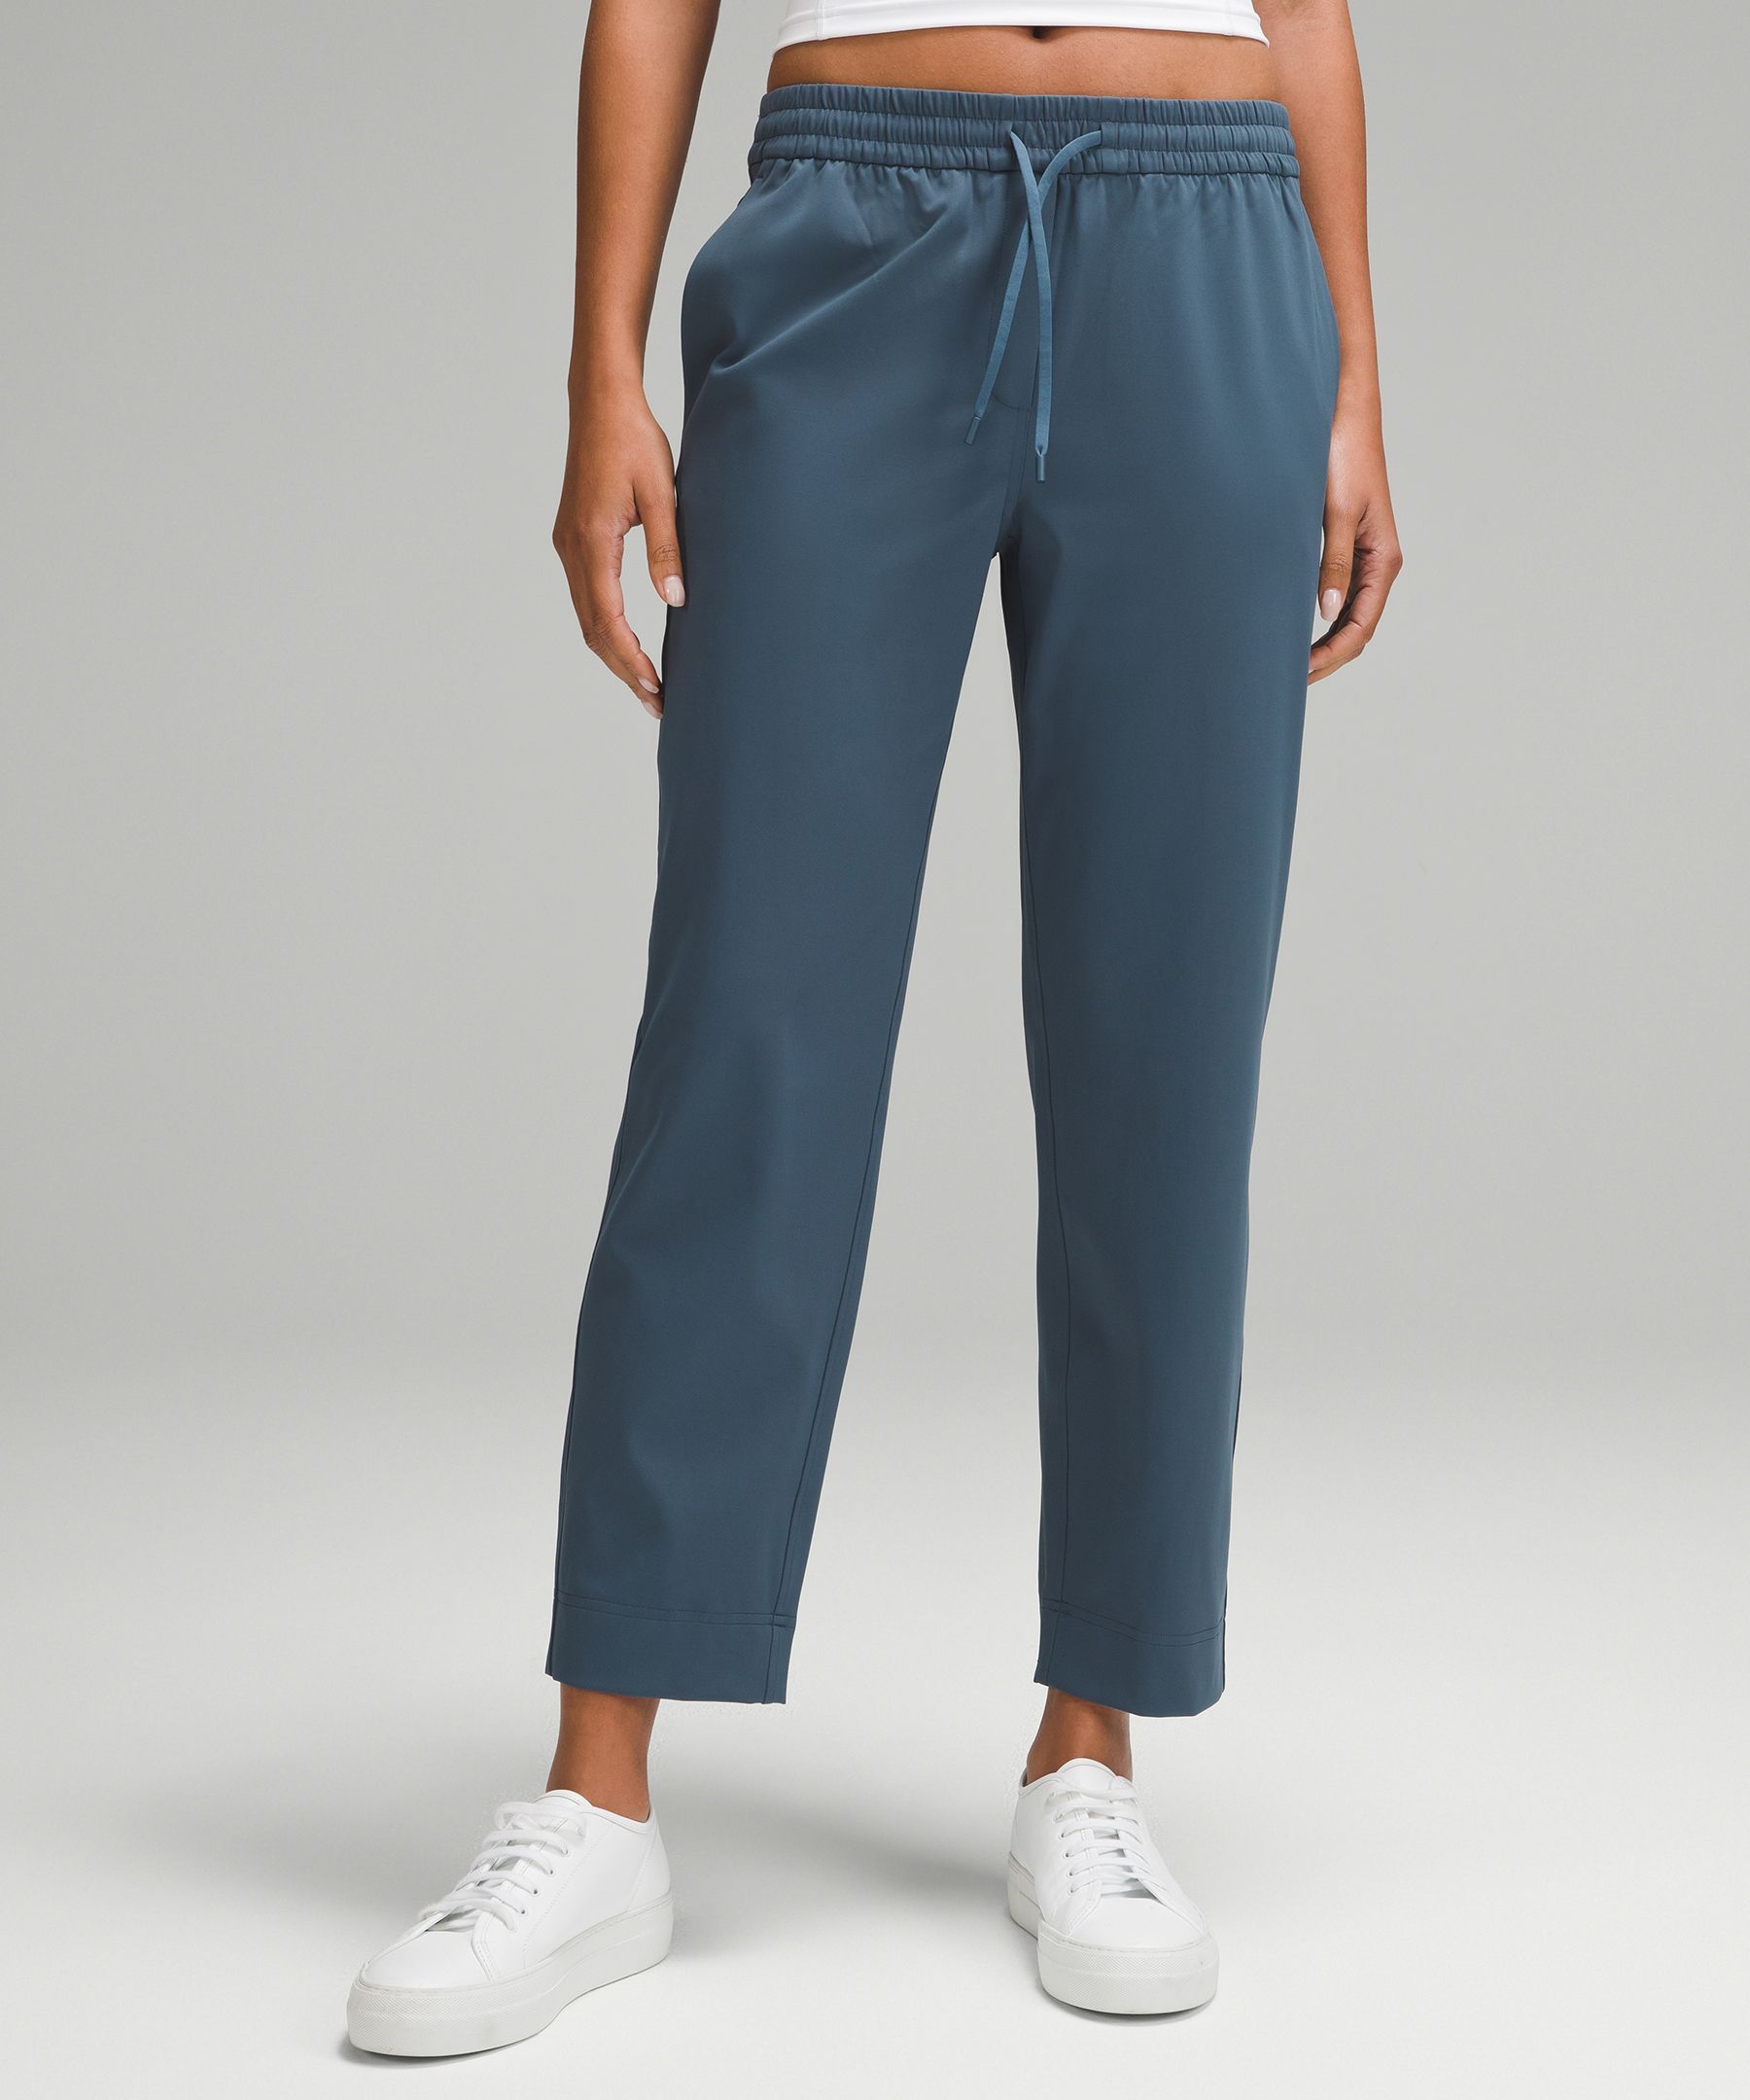 Lululemon athletica Tapered-Leg Mid-Rise Pant 7/8 Length *Luxtreme, Women's Trousers